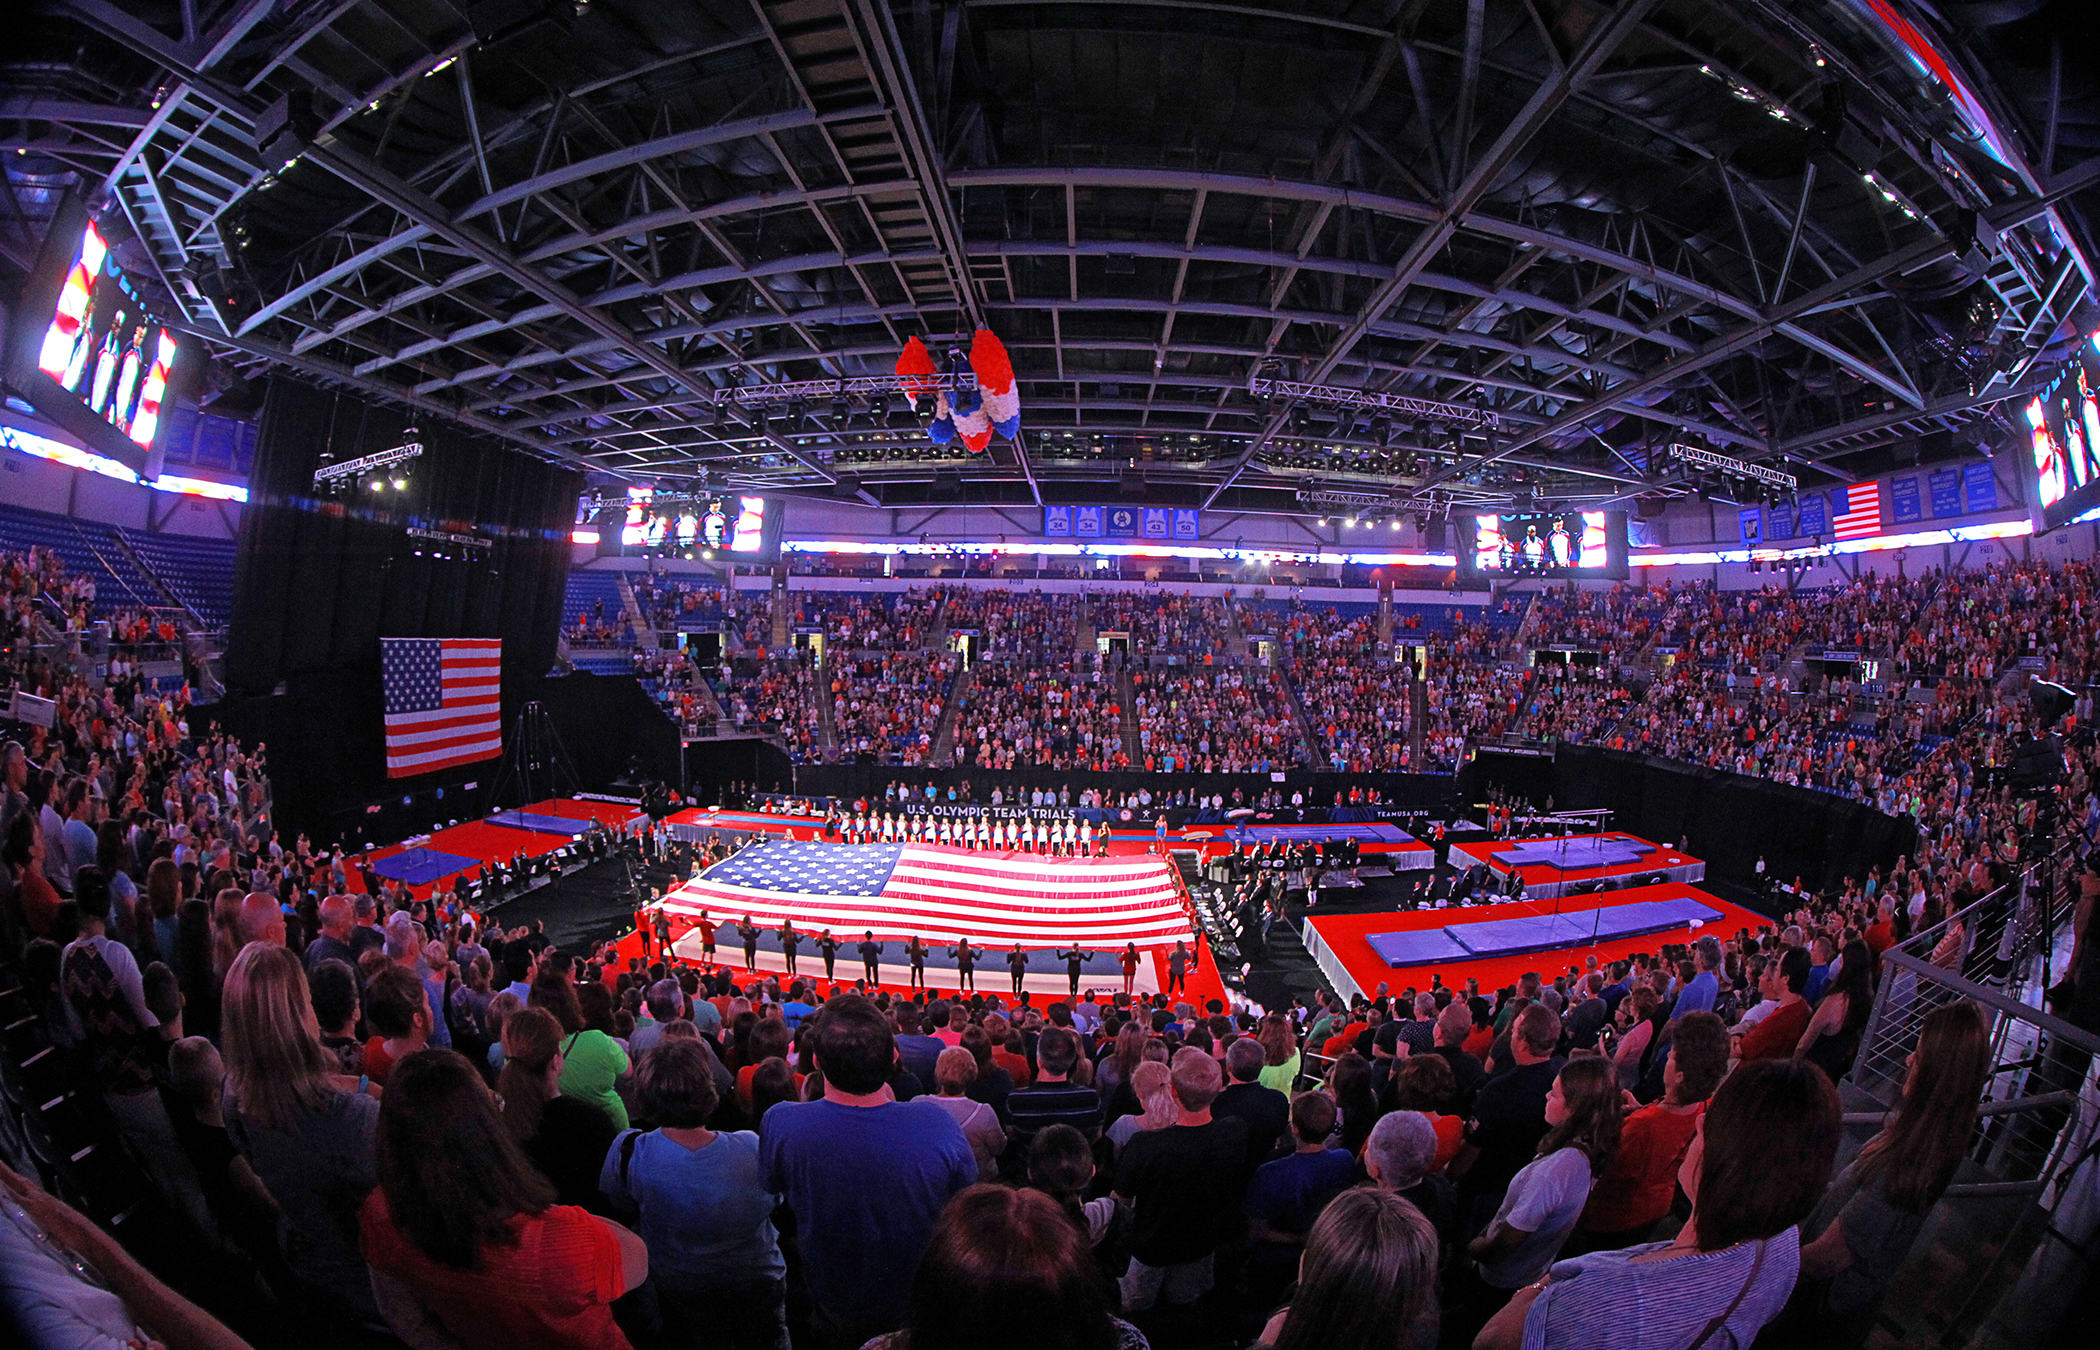 Single-Session Tickets for 2021 U.S. Olympic Team Trials – Gymnastics in St. Louis Go On Sale Today at 10am